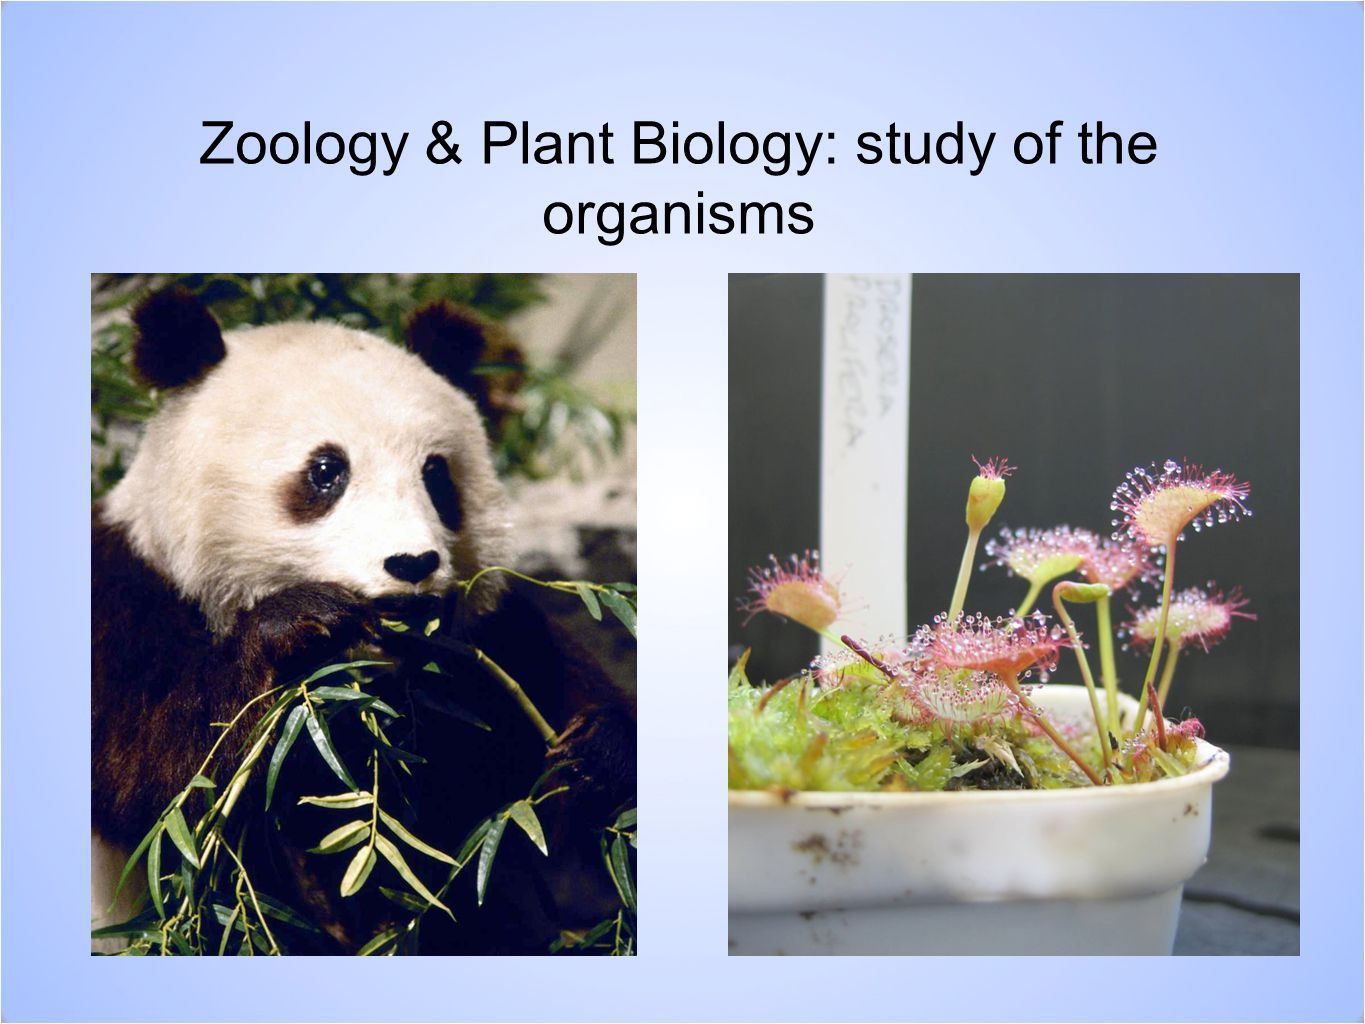 Zoology & Plant Biology: study of the organisms